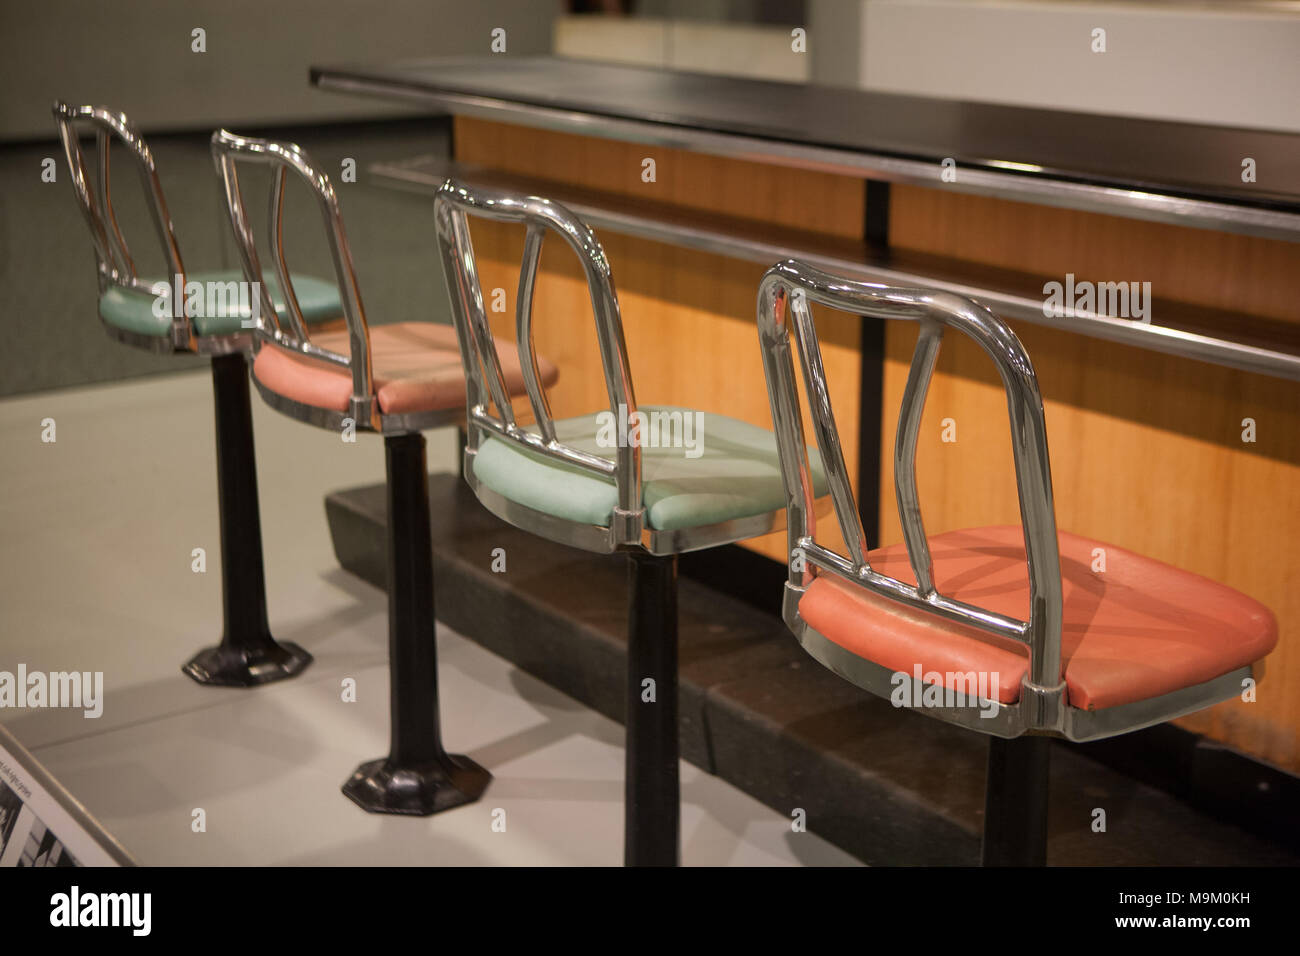 Woolworth Lunch Counter Stock Photos & Woolworth Lunch Counter Stock Images - Alamy1300 x 956